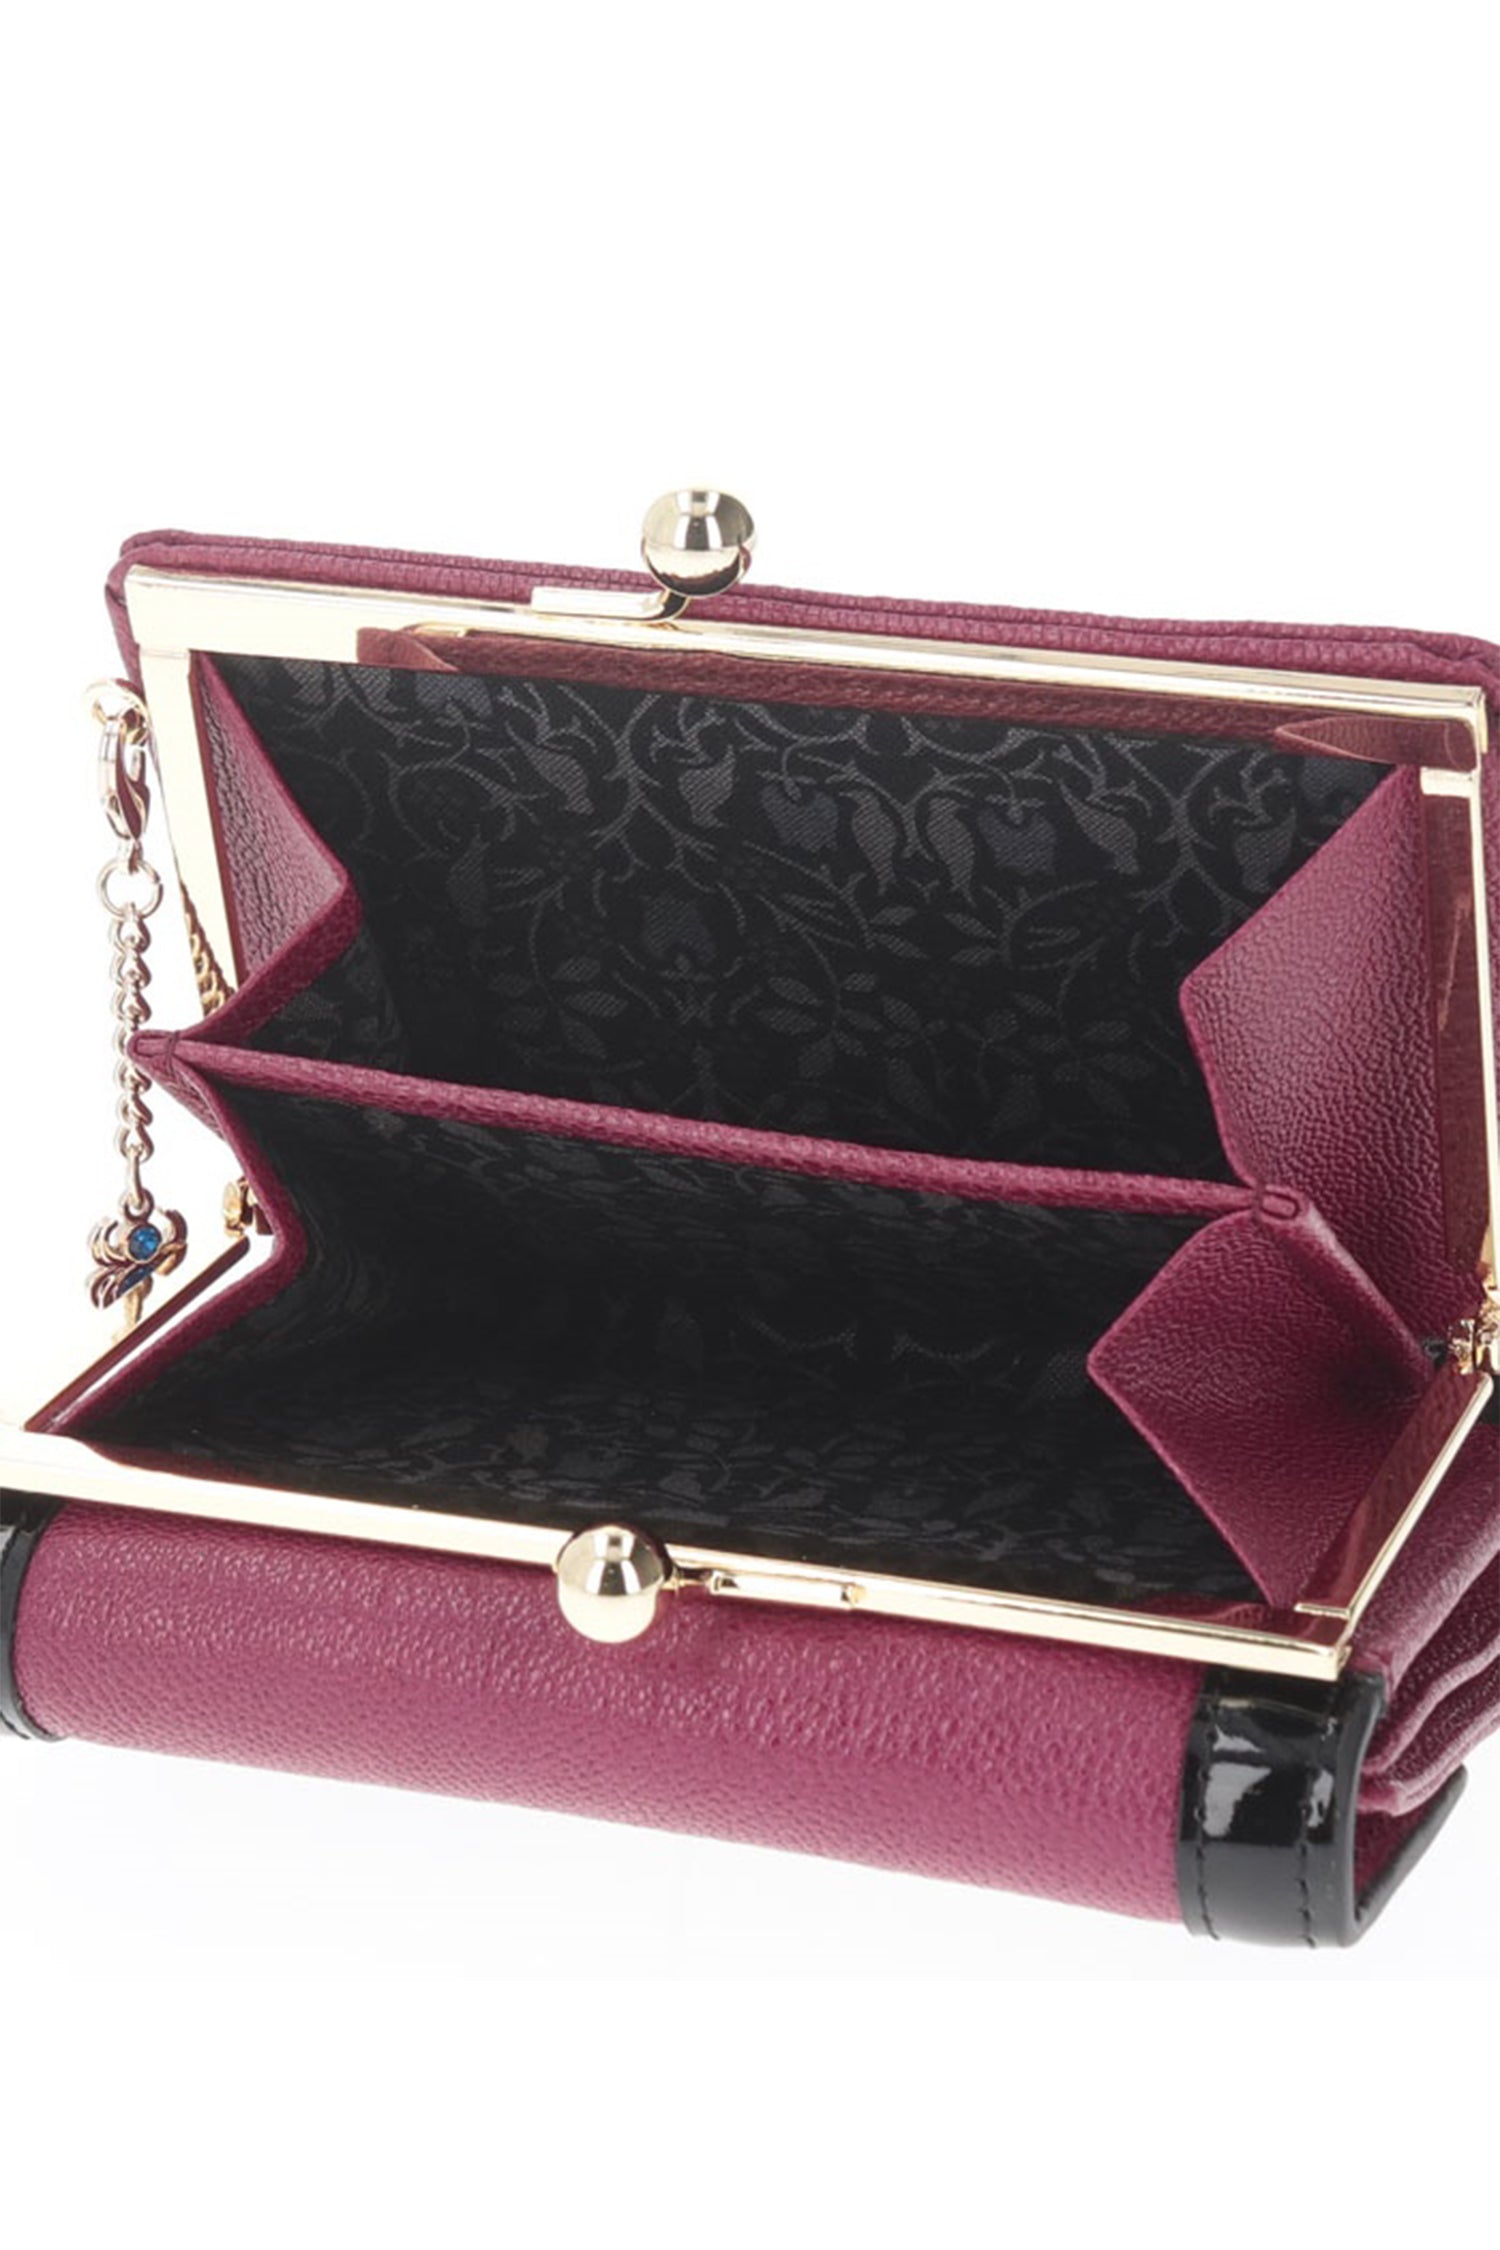 When open, the Poison Clasp Bi-fold Wallet Bordeaux shows two space to have your change in it